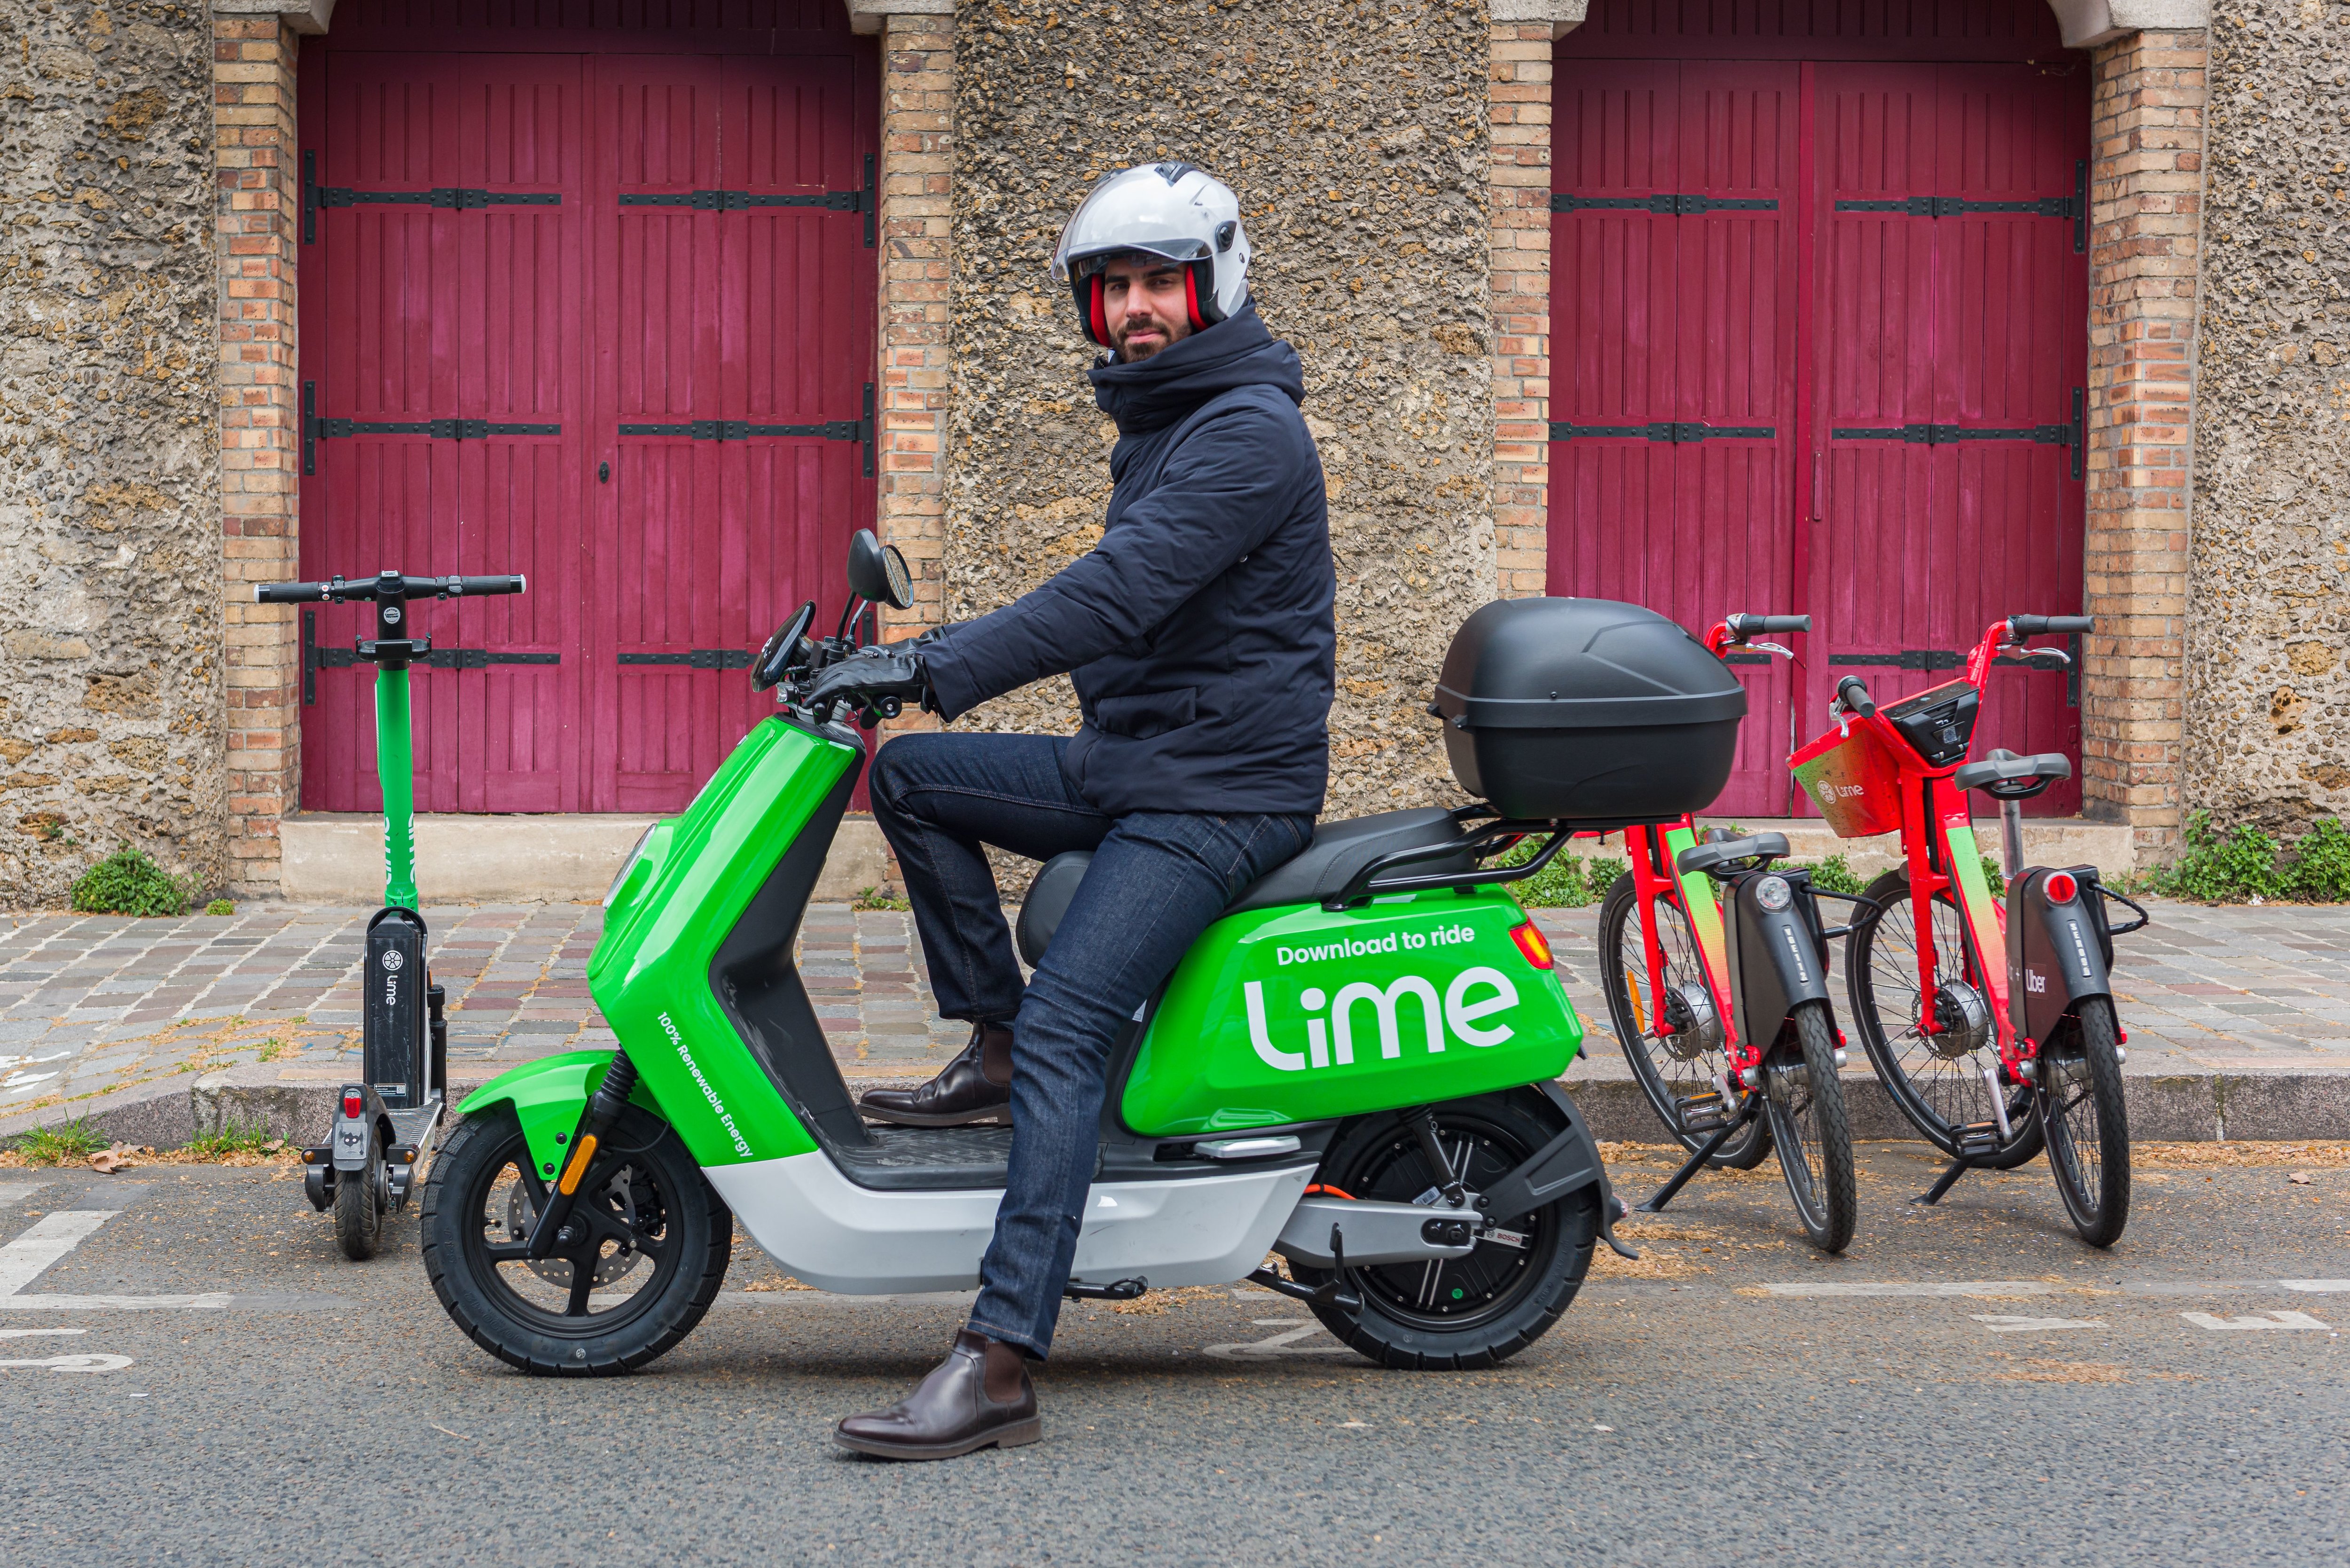 Scooter age. Lime e-Scooter. Lime Paris. How to choose a Moped. Vulcain Scooter Paris.